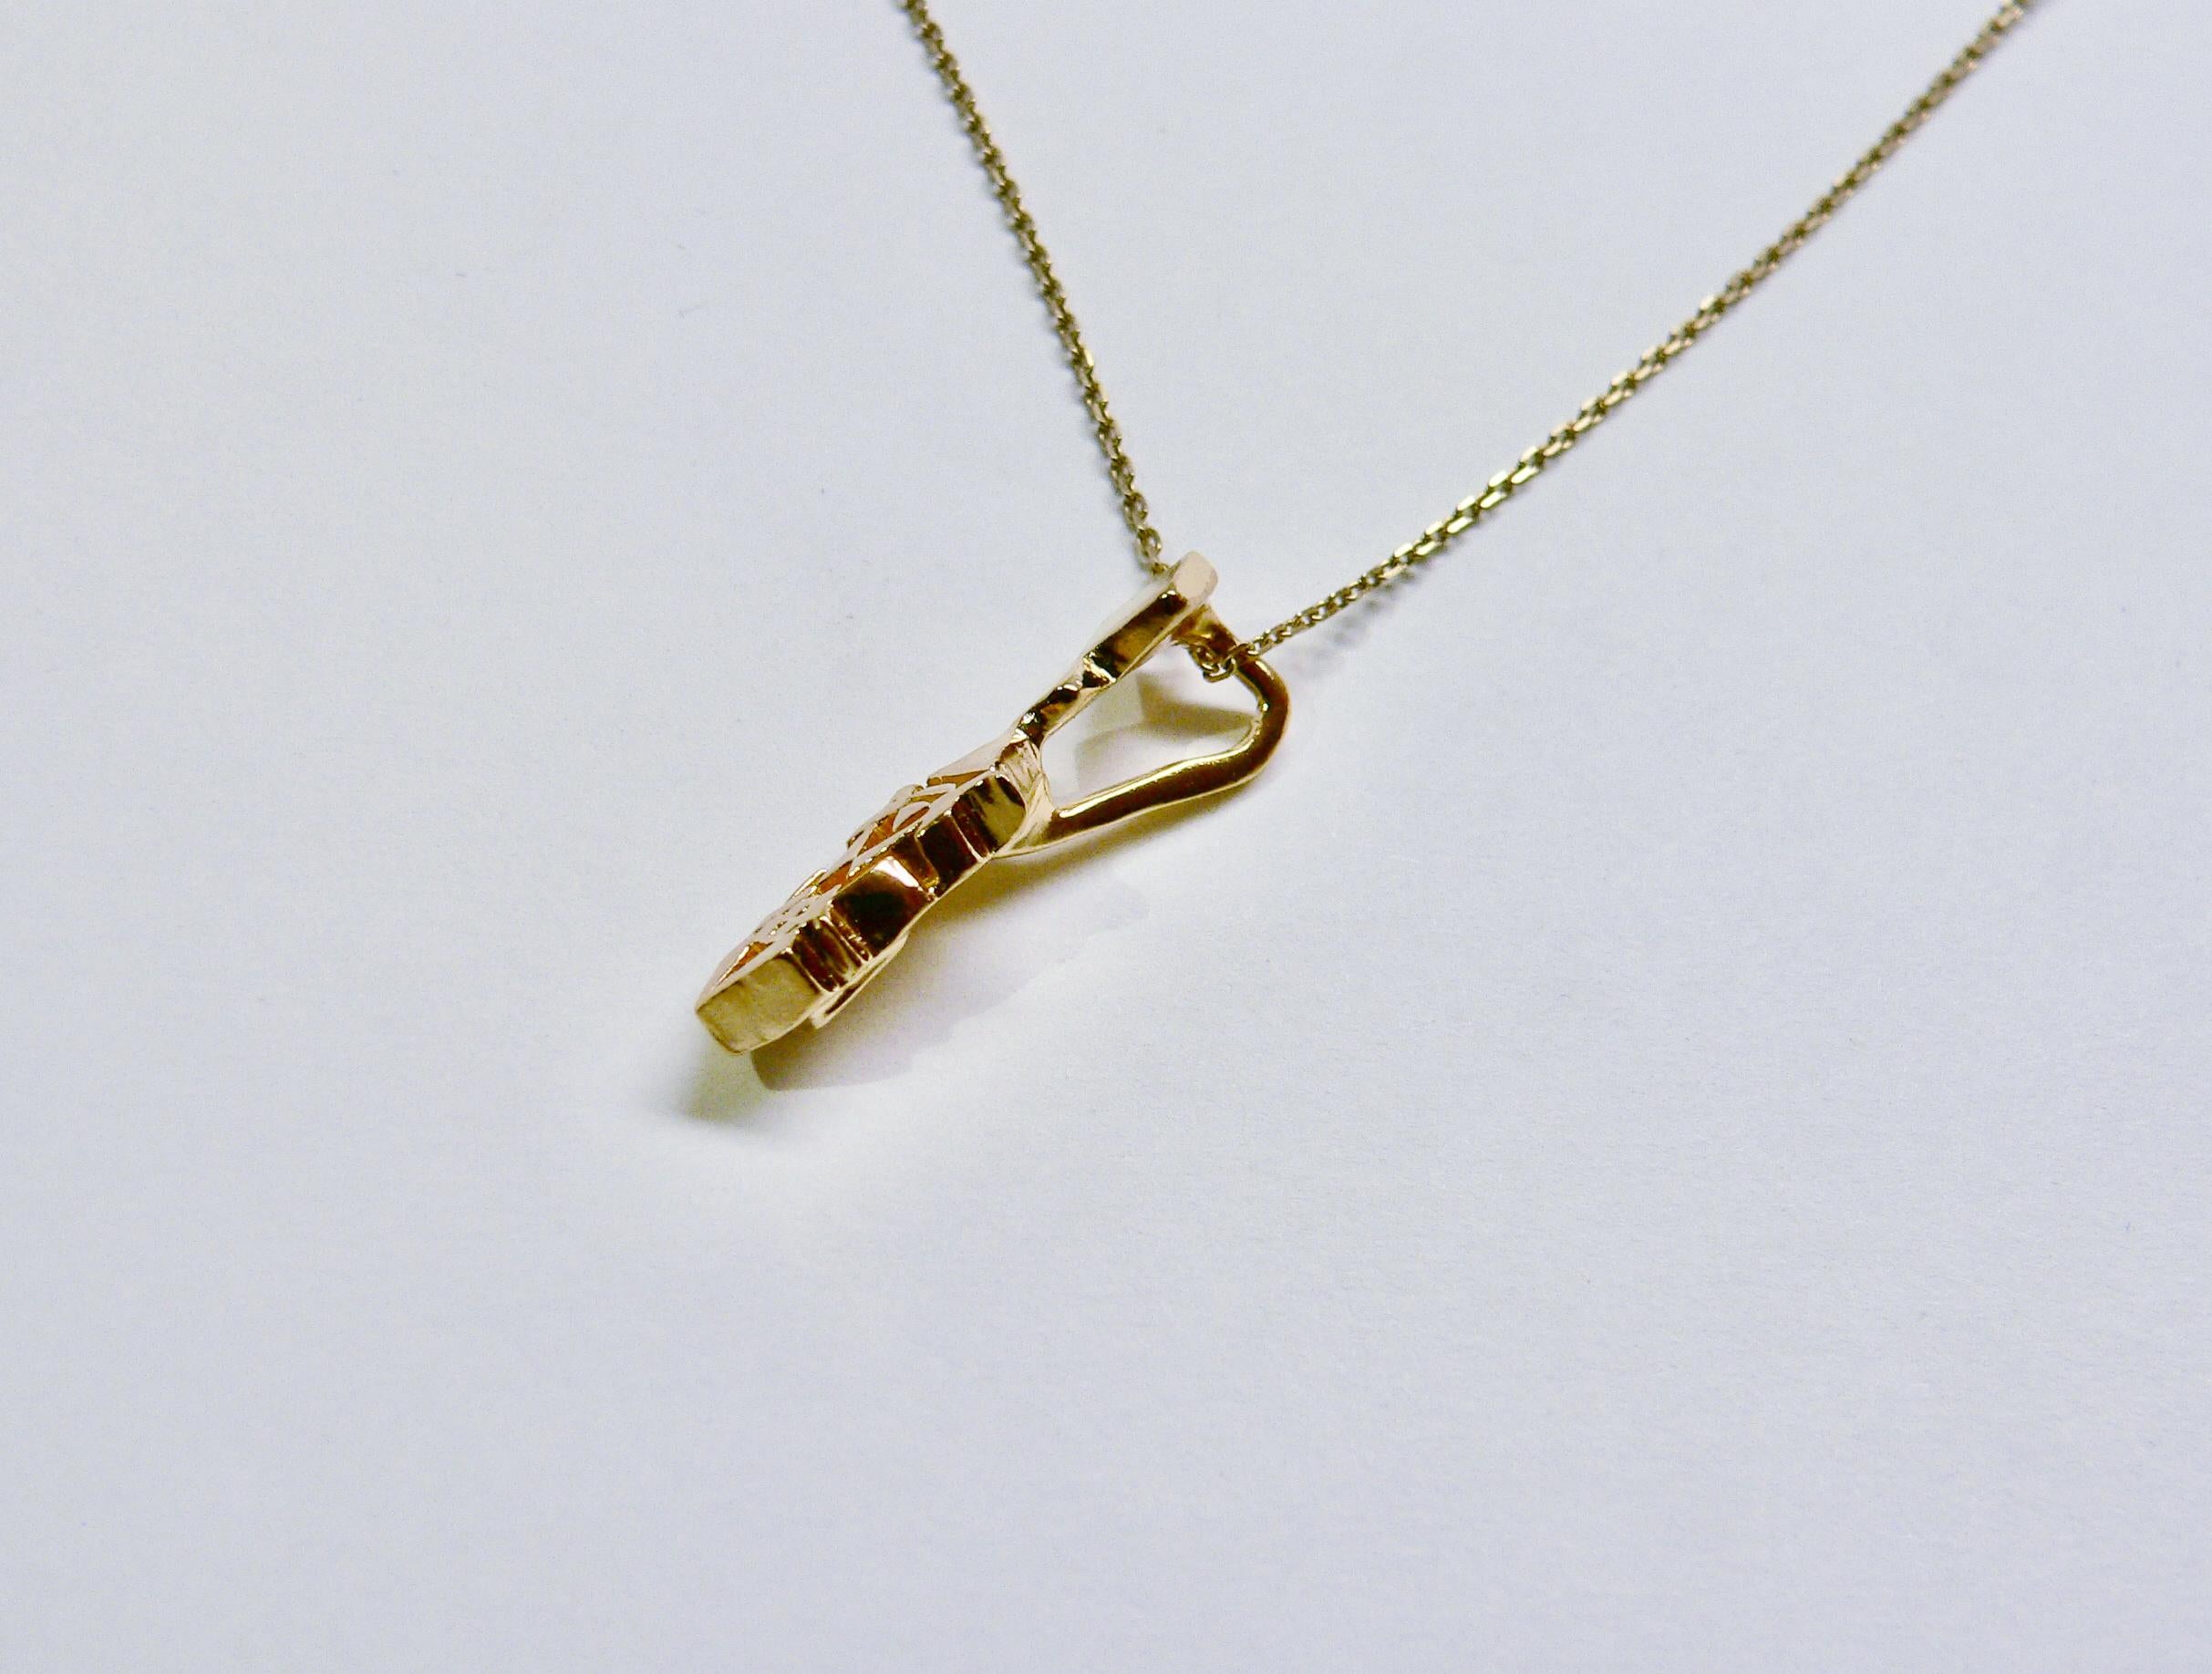 Geometric pattern Pendant B, Sterling Silver, Yellow Gold-Plated For Sale 2